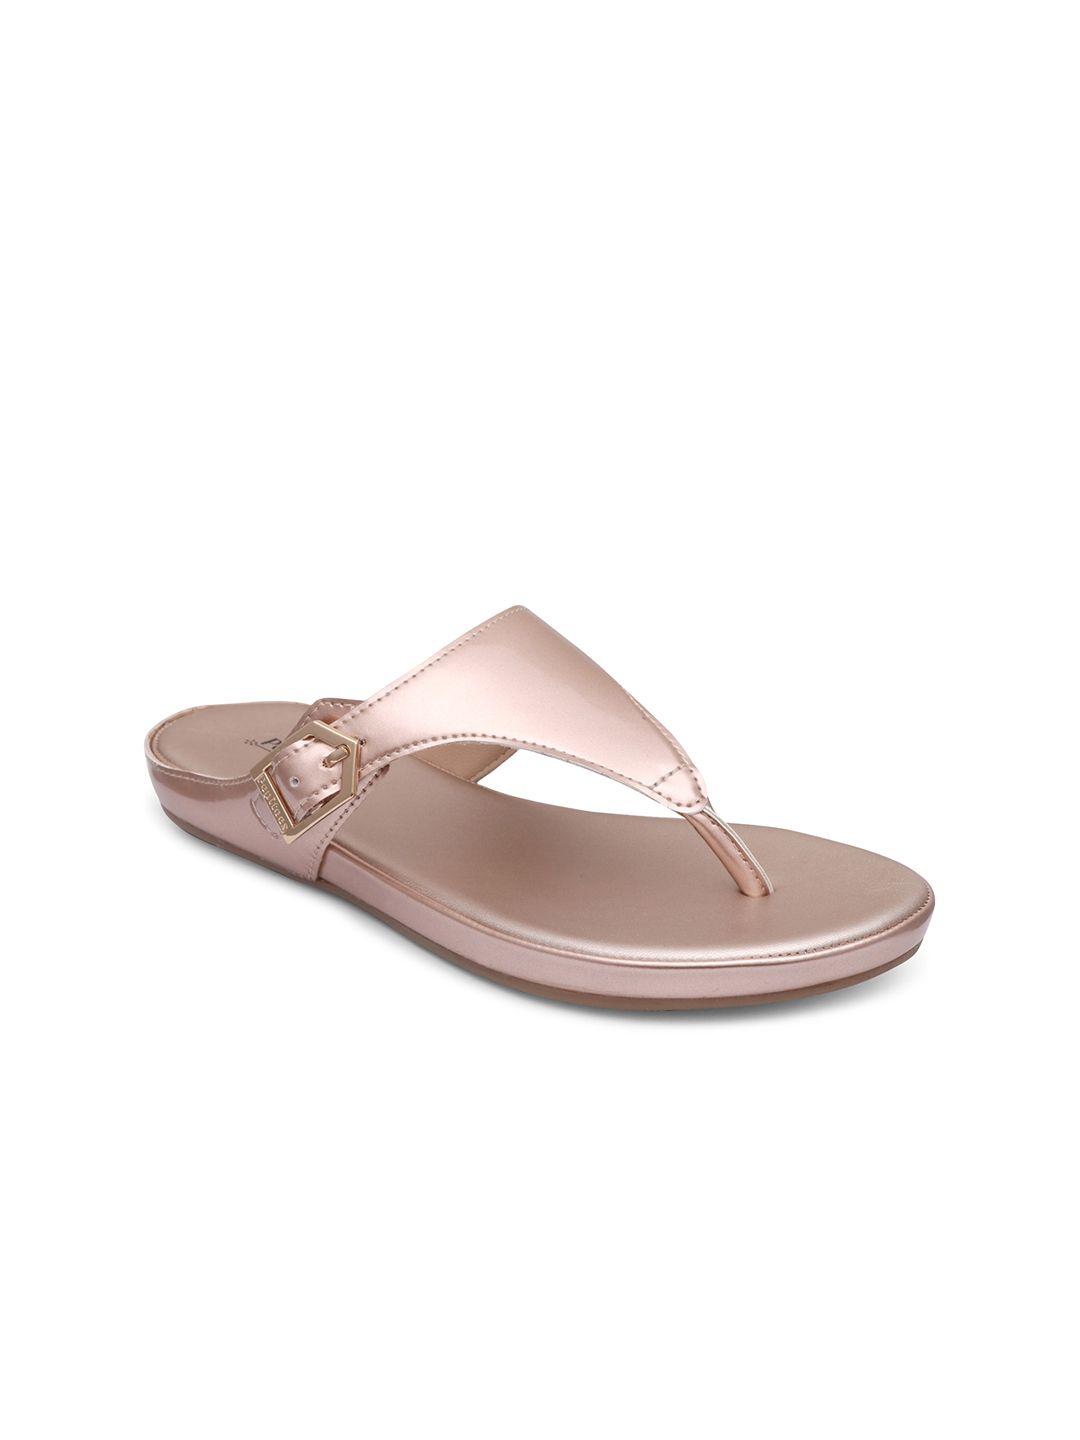 pepitoes-women-open-toe-flats-with-buckles